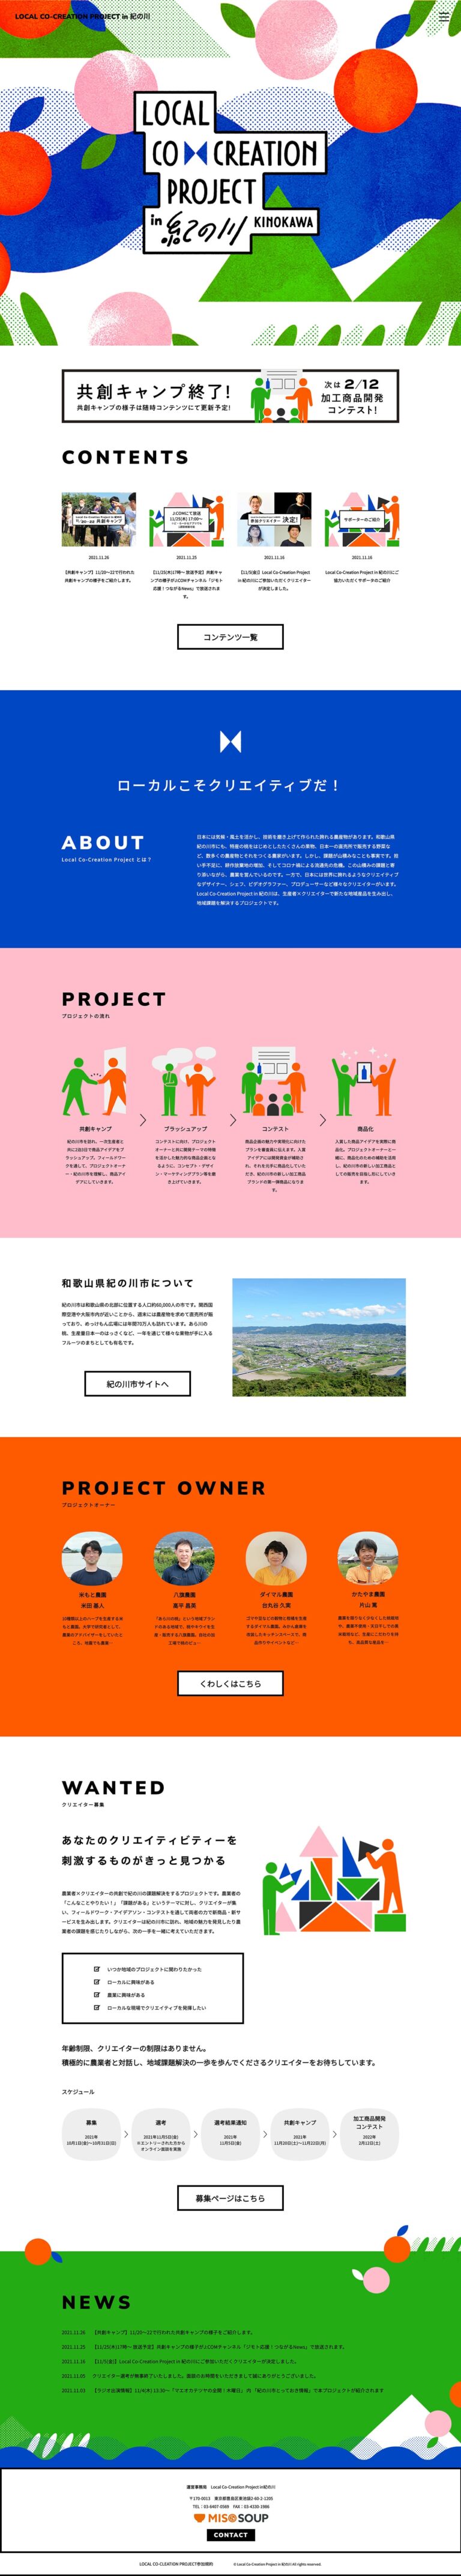 LOCAL CO-CREATION PROJECT in 紀の川